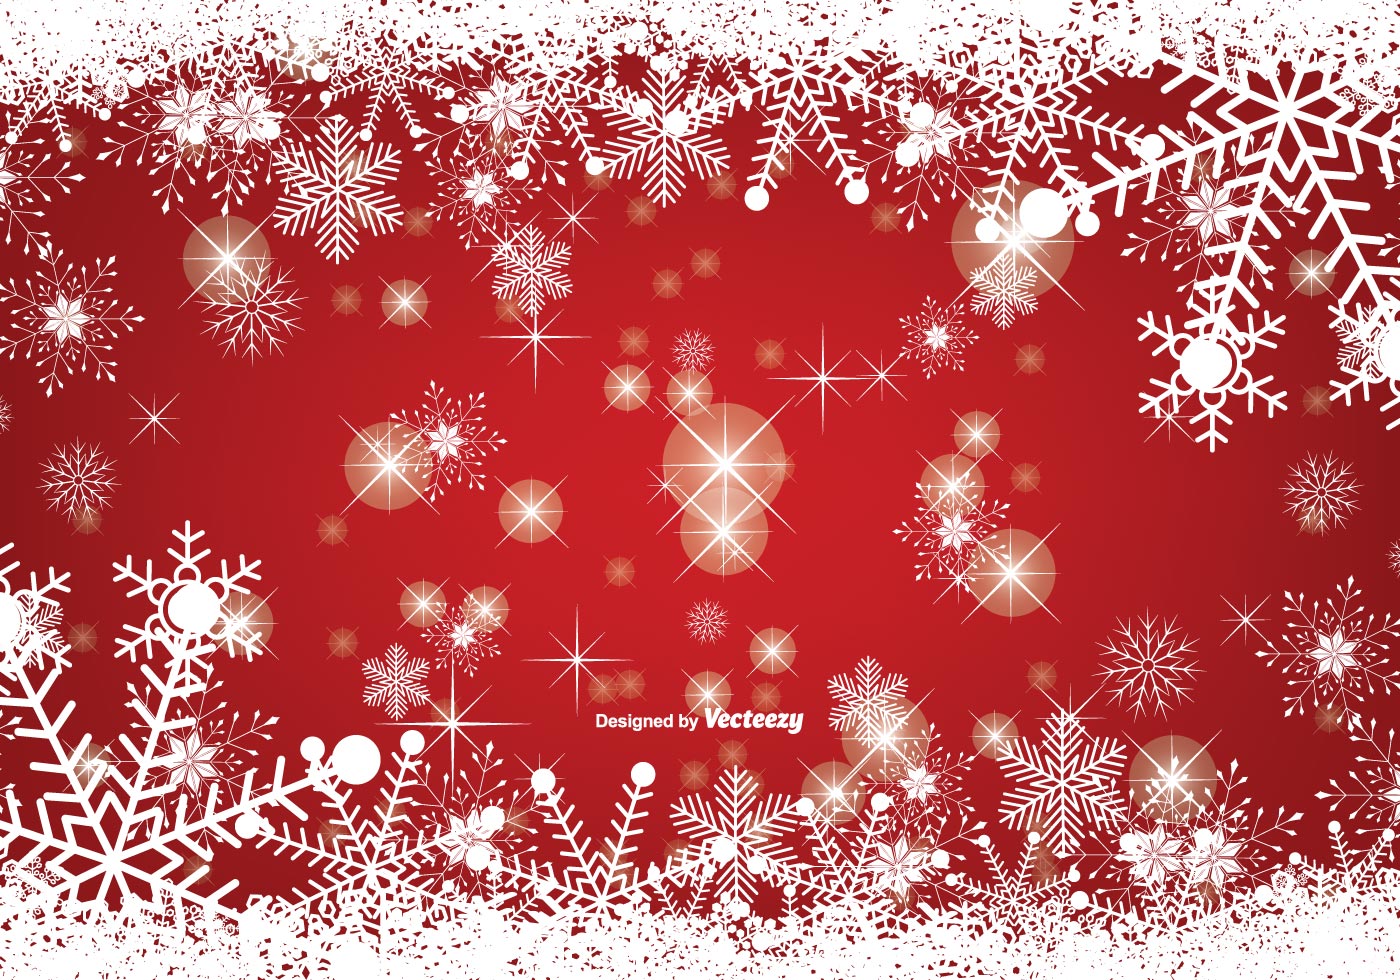 Red Christmas Background Free Vector Art - (24090 Free Downloads)